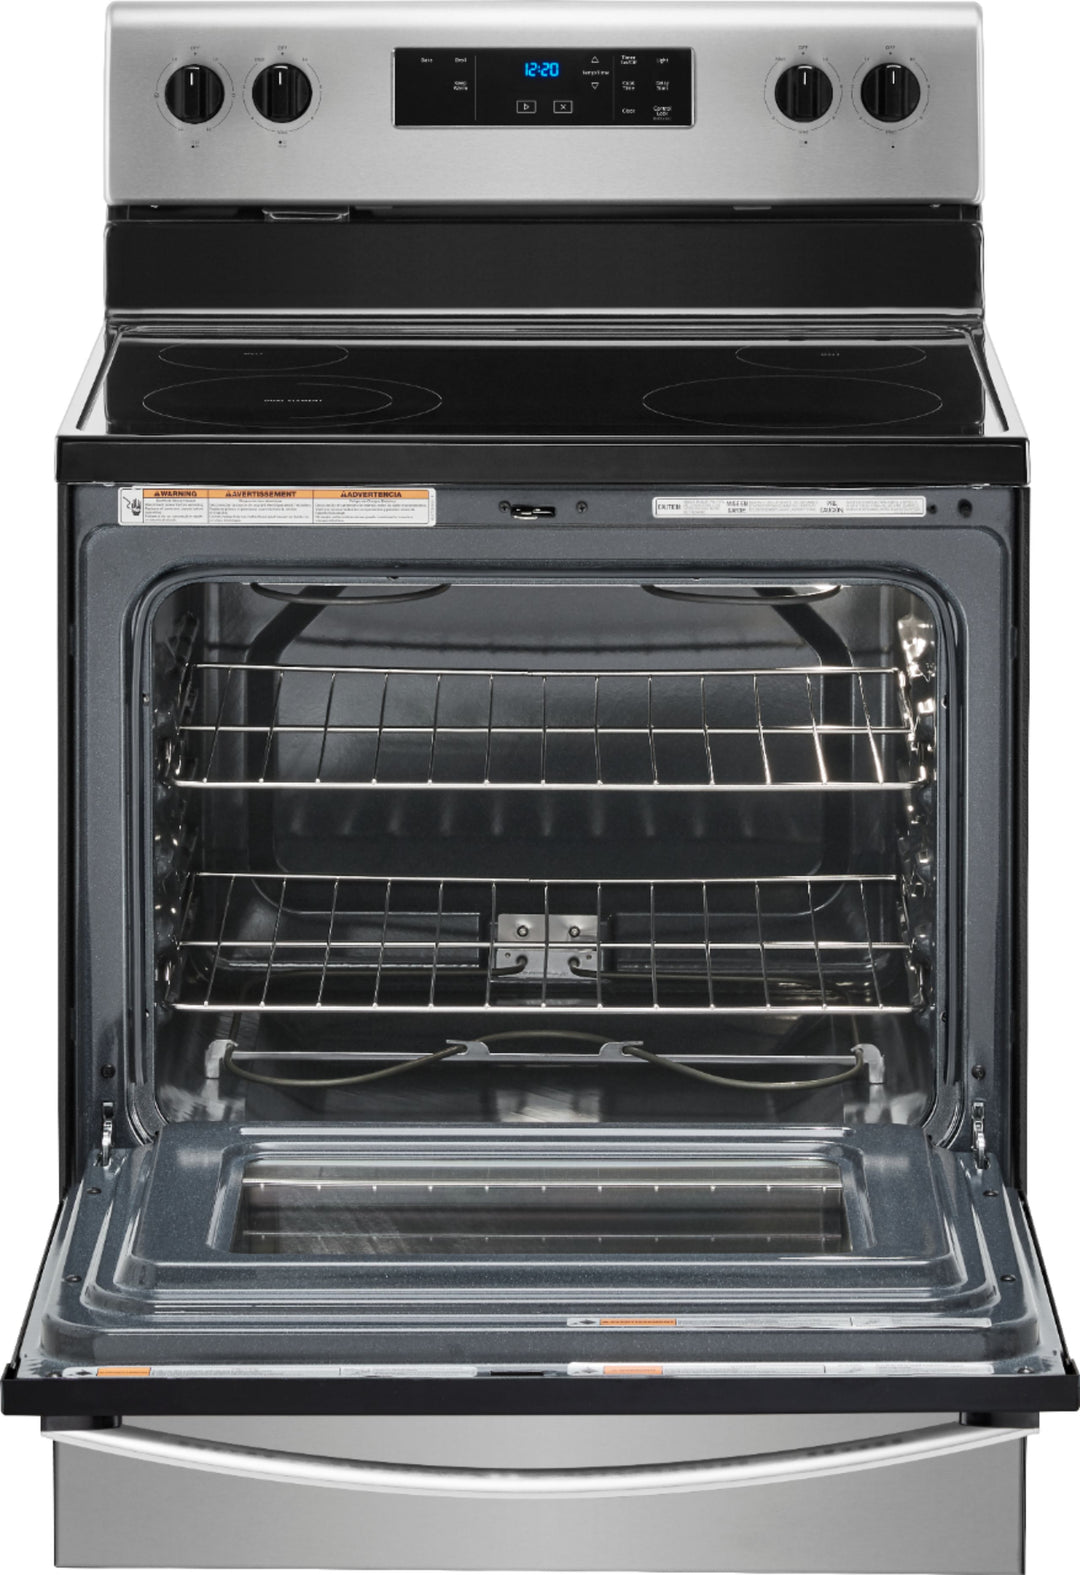 Whirlpool - 5.3 Cu. Ft. Freestanding Electric Range with Keep Warm Setting - Stainless steel_3